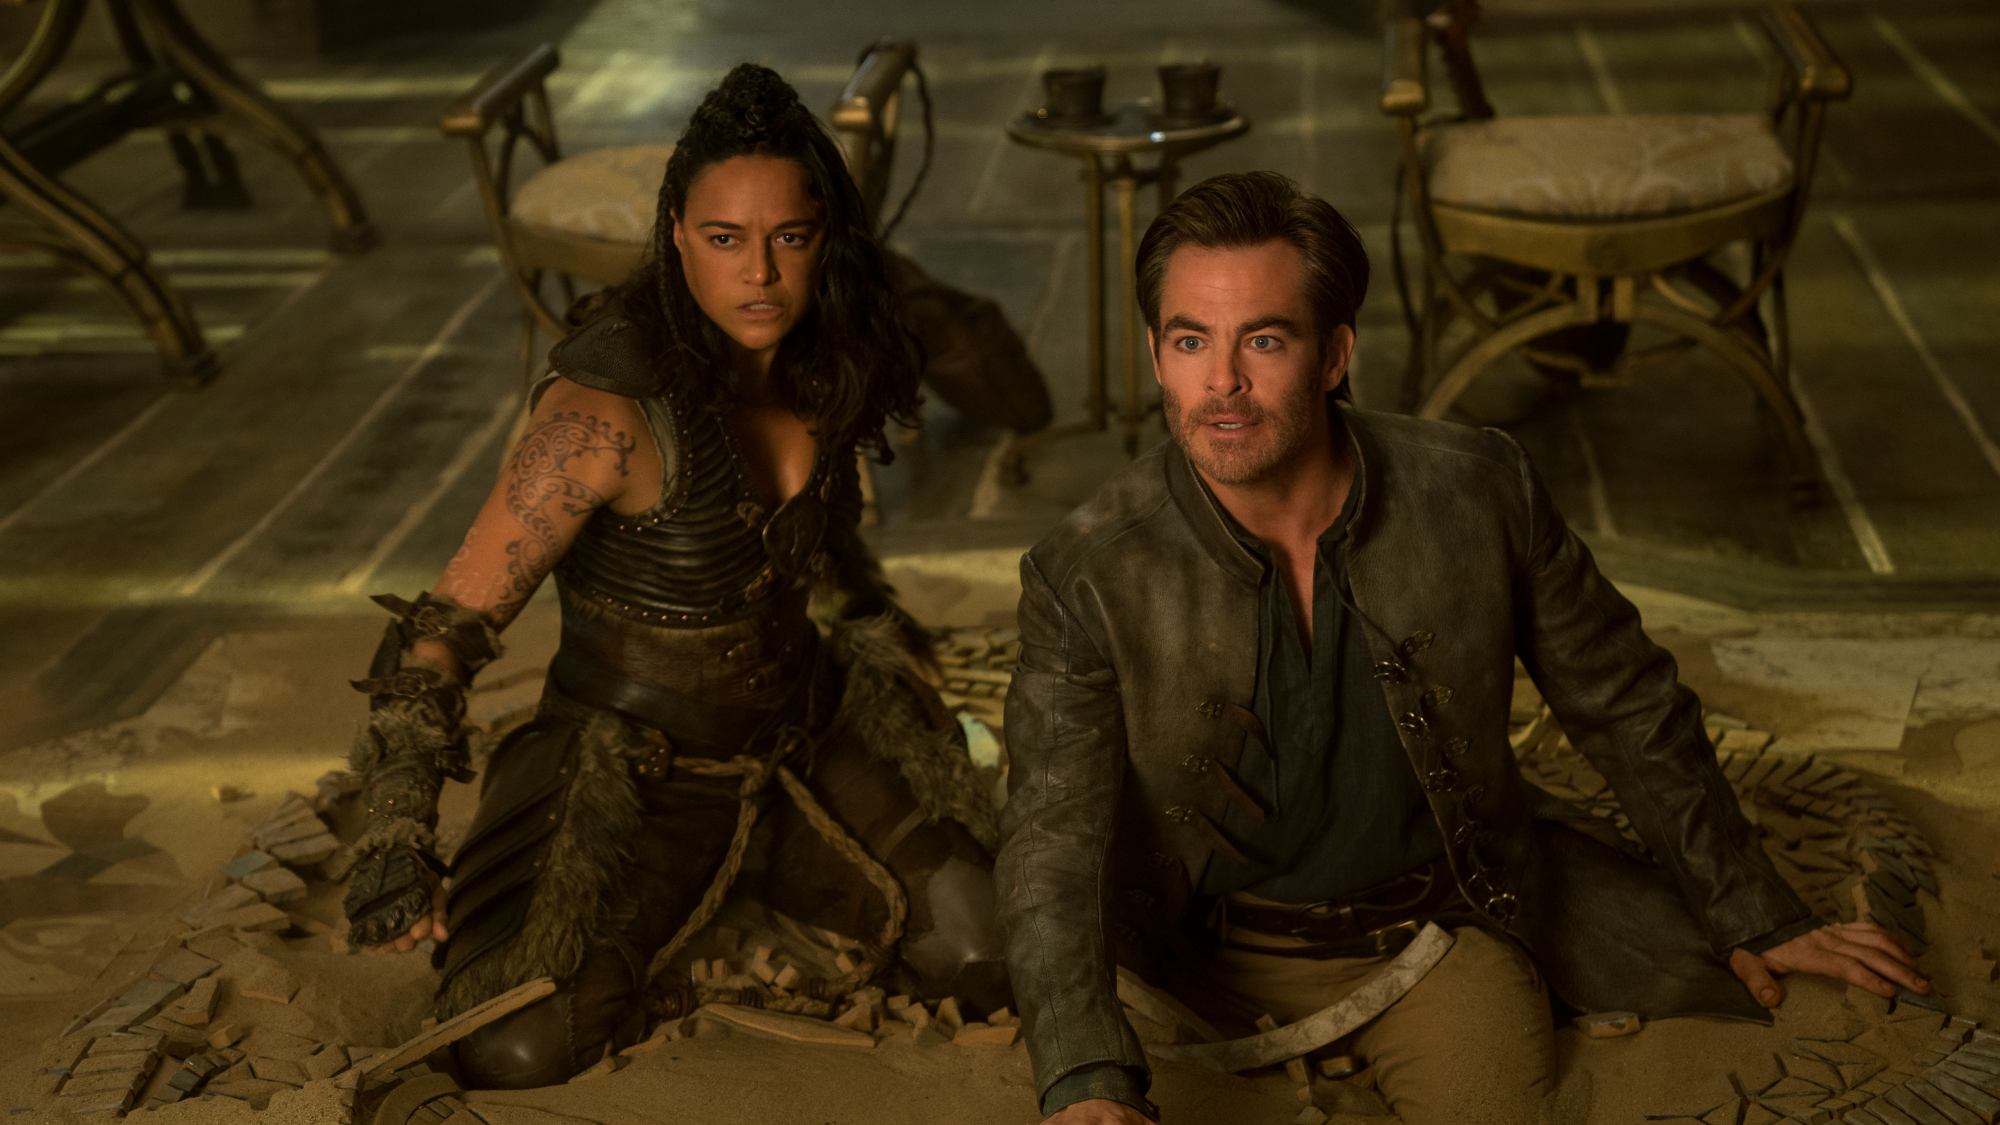 'Dungeons & Dragons: Honor Among Thieves' Chris Pine as Edgin and Michelle Rodriguez as Holga sunken into the ground looking frustrated.